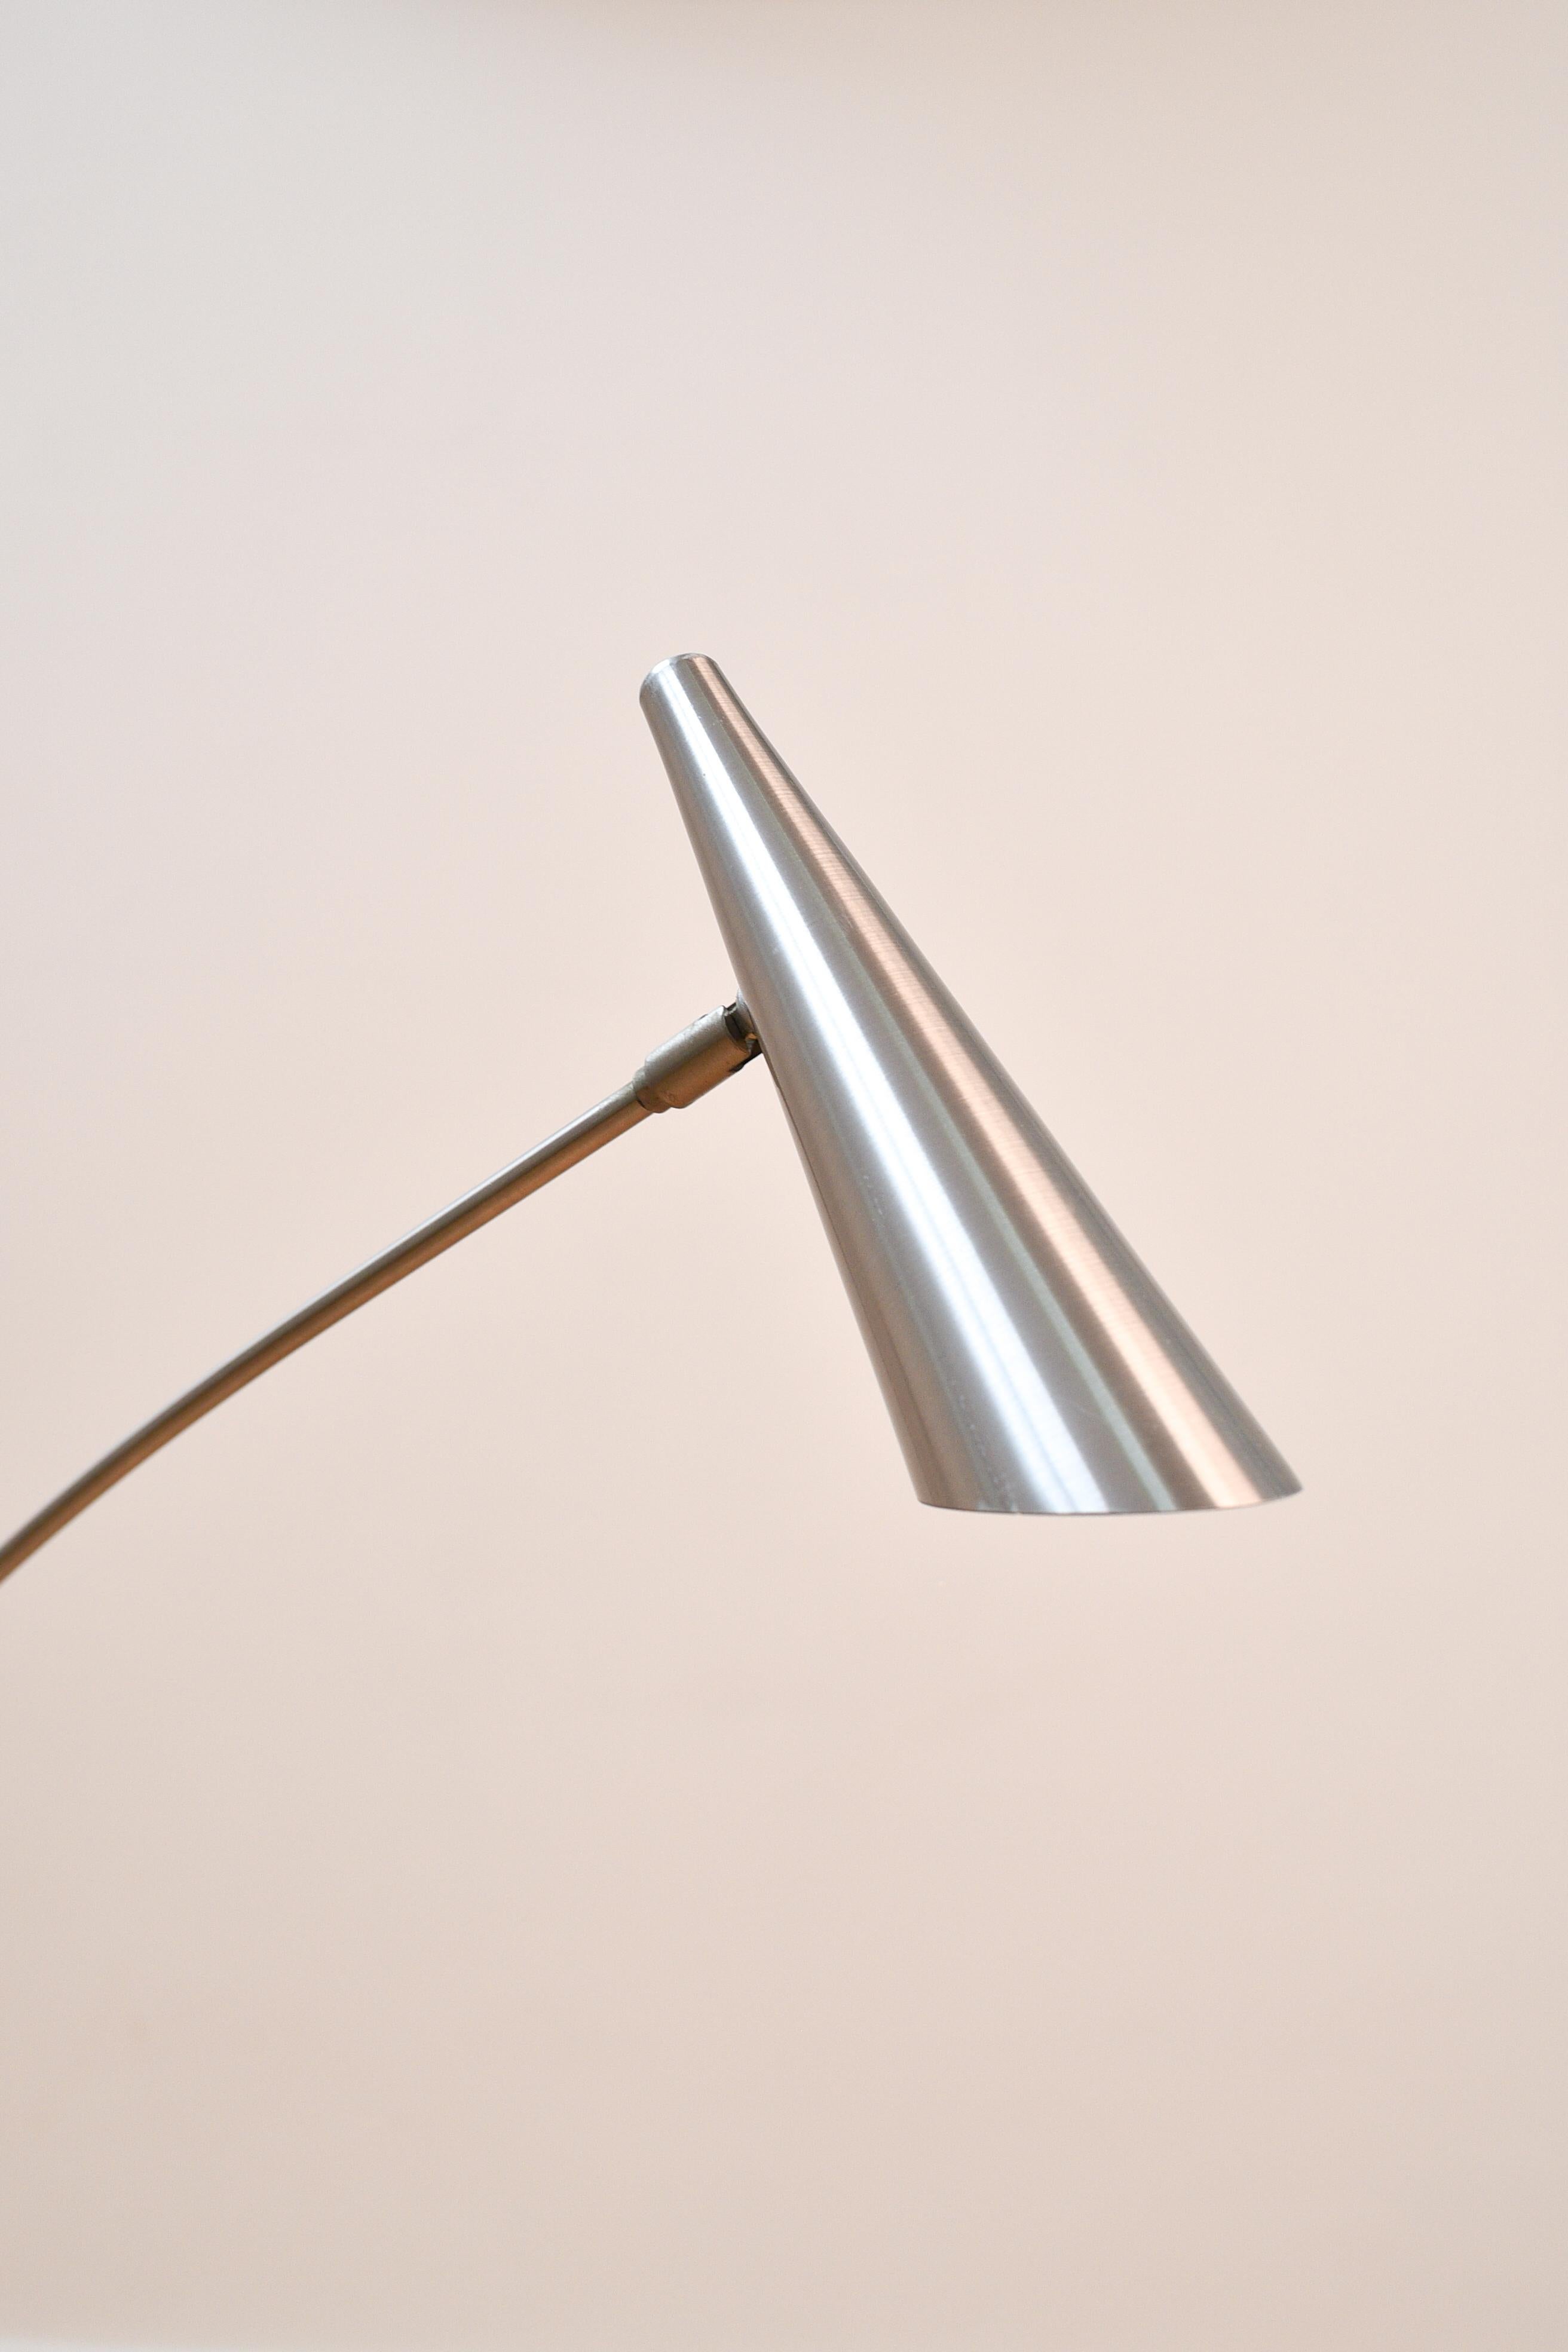 Dimmable floor reading lamp in chrome, made in 1997. Italian design and made in Italy (Genova). 

The chrome has some light scratches - wear consistent with age and use